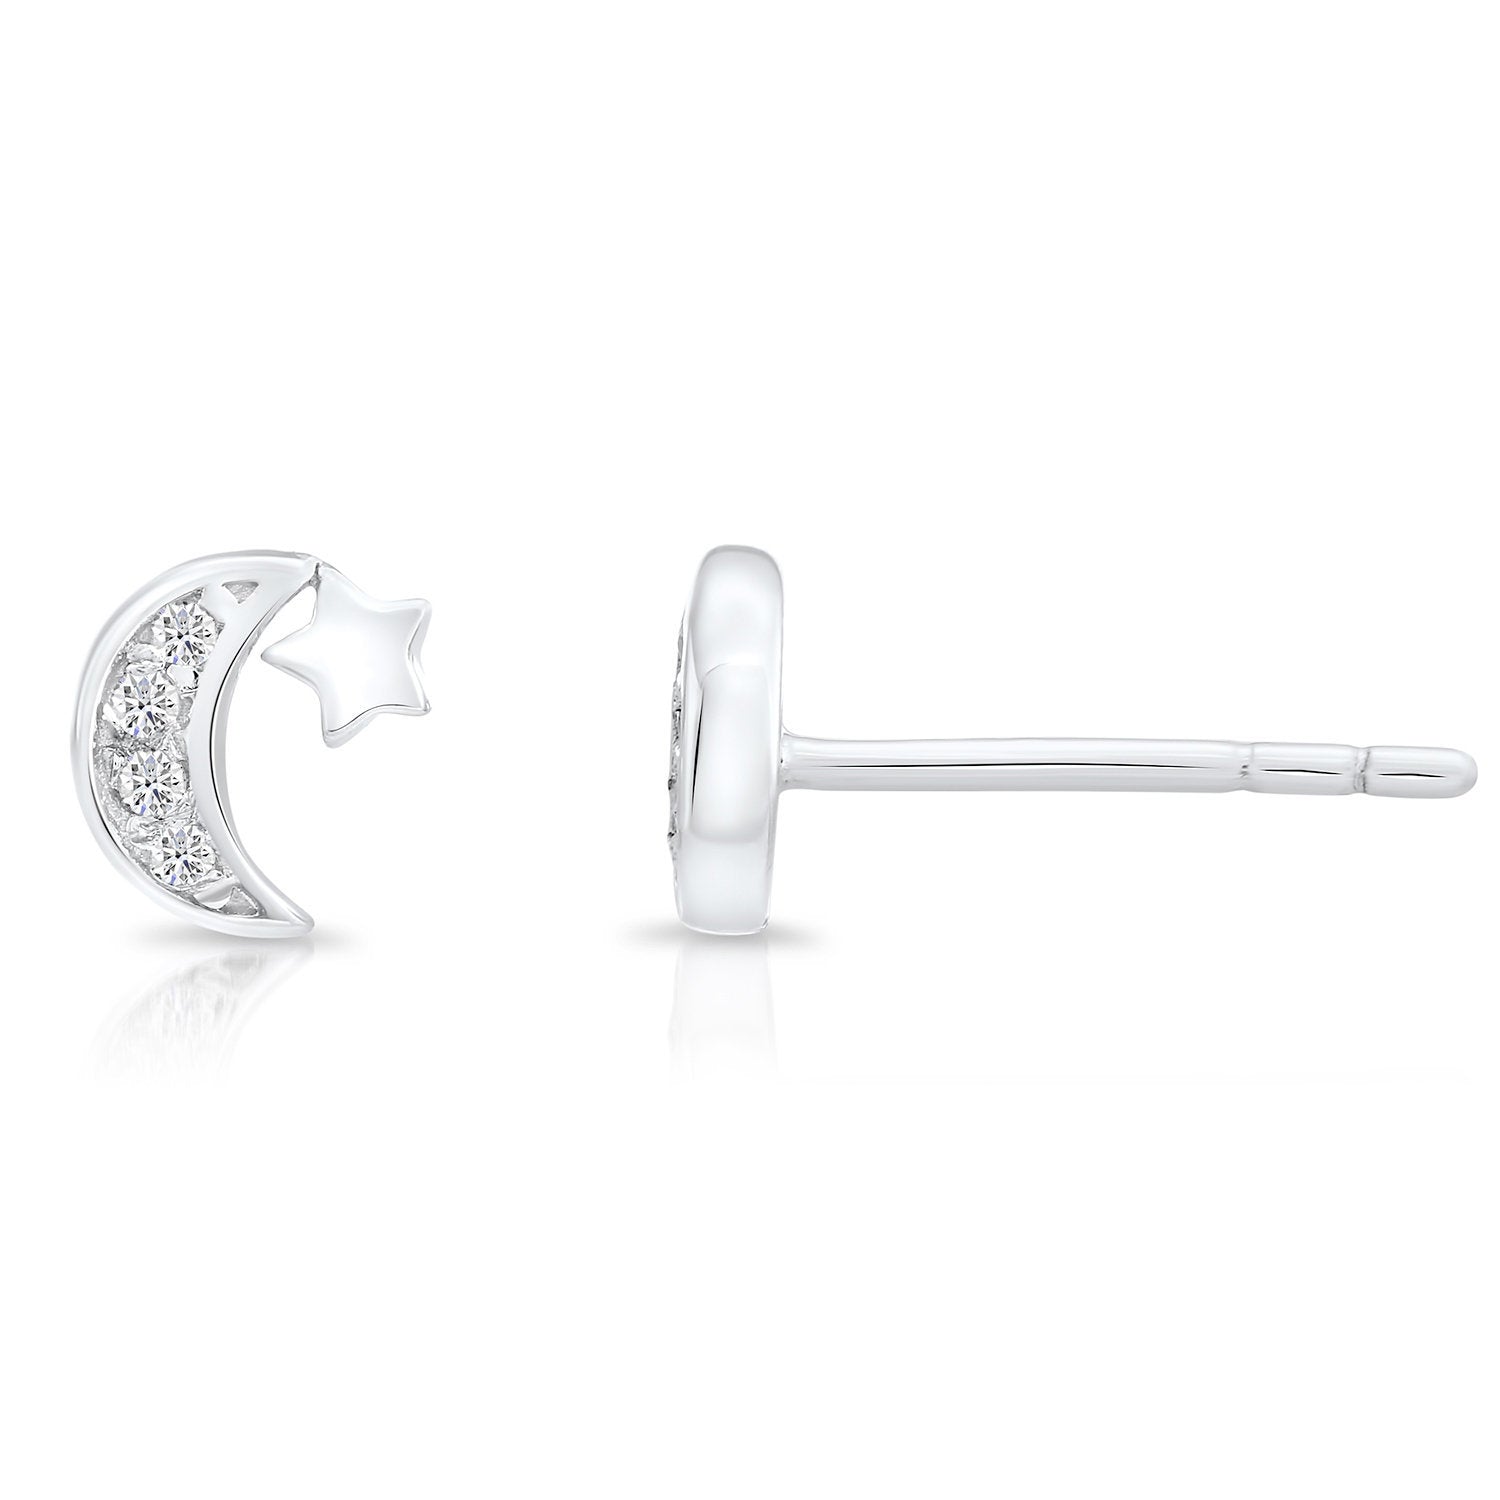 CZ Tiny Moon with Star Stud Earrings in Sterling Silver